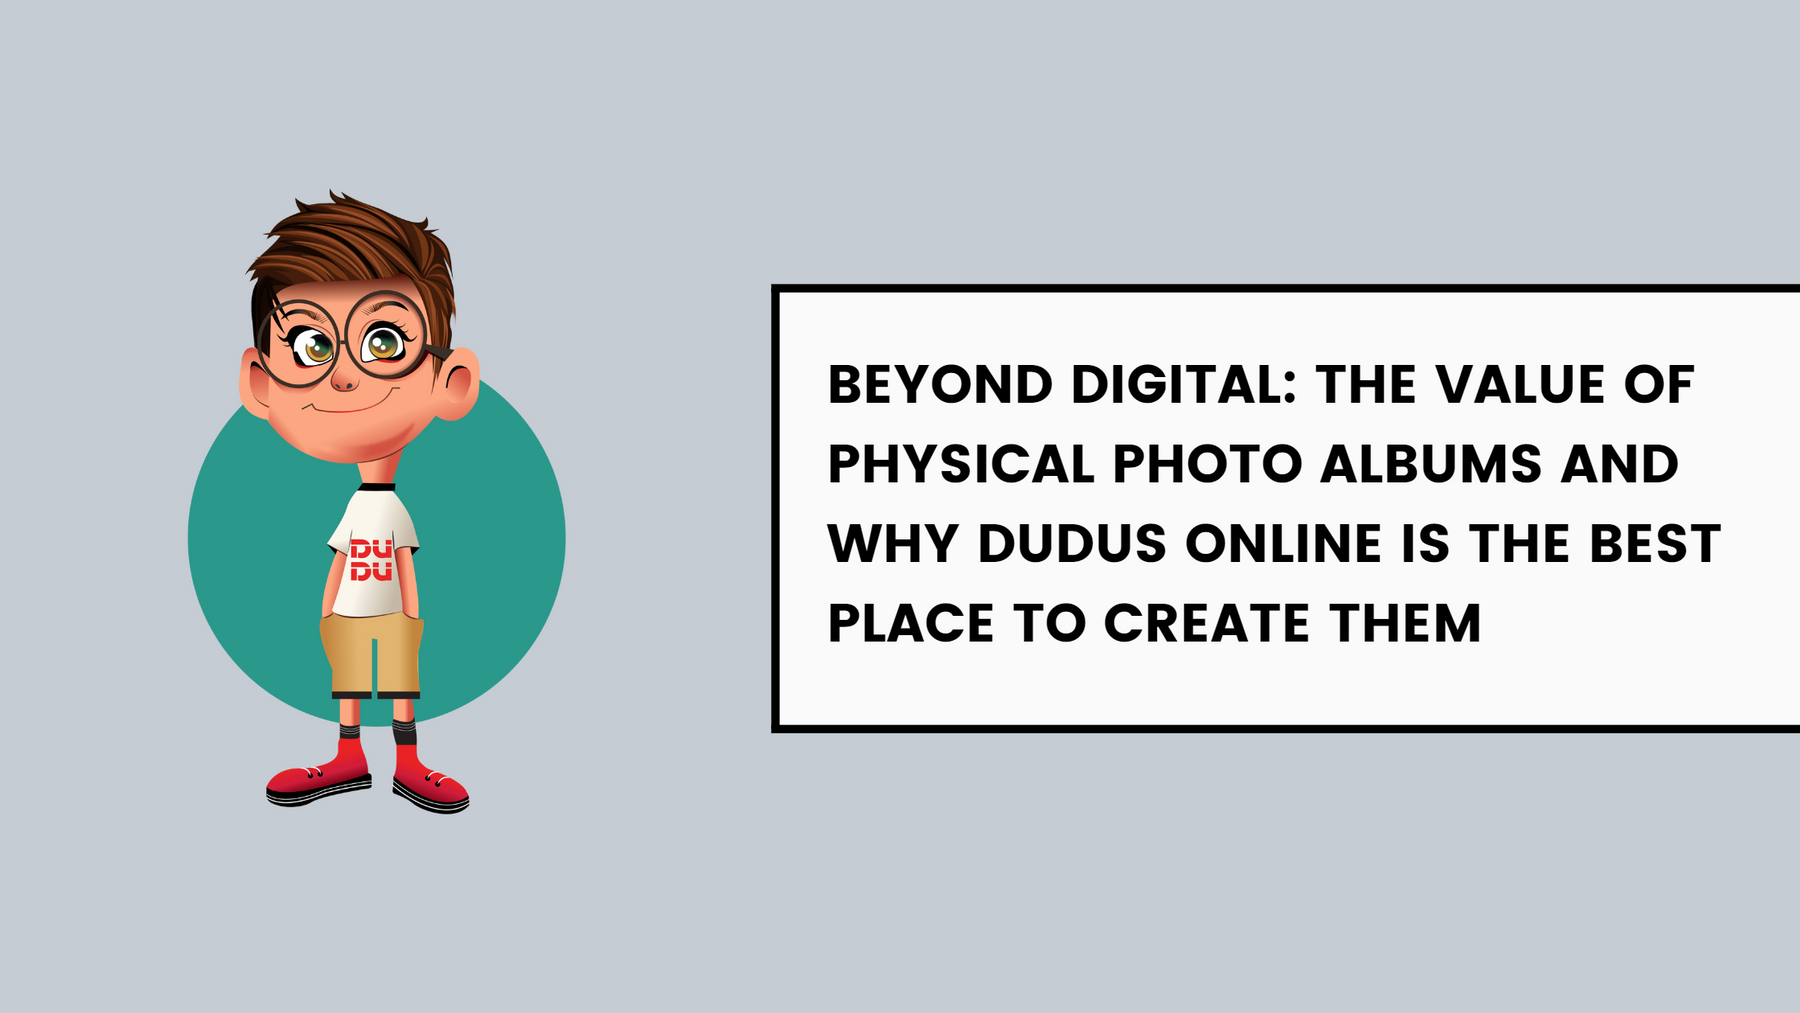 Beyond Digital: The Value of Physical Photo Albums and Why Dudus Online is the Best Place to Create Them